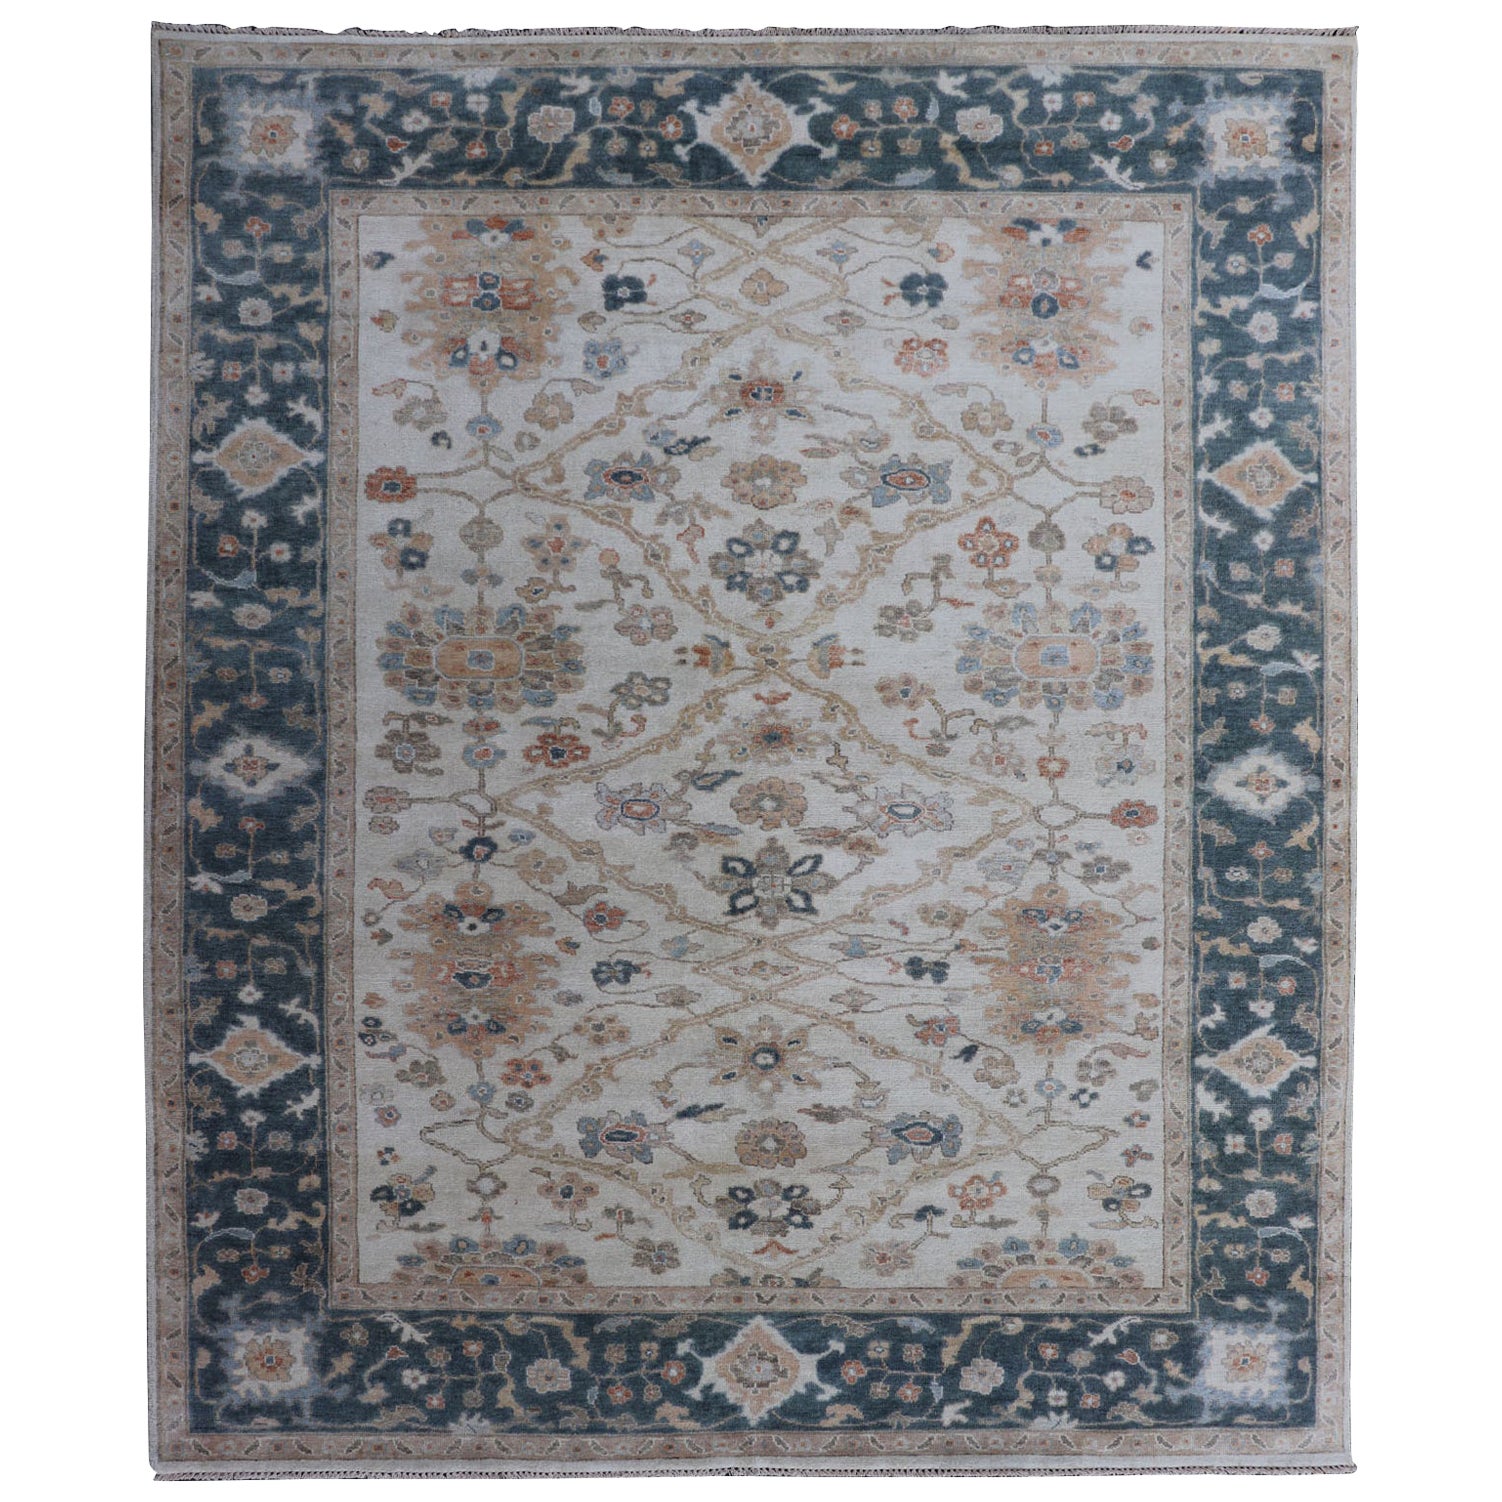 Oushak Design Rug by Keivan Woven Arts in Teal Blue, Cream and Multi Colors For Sale